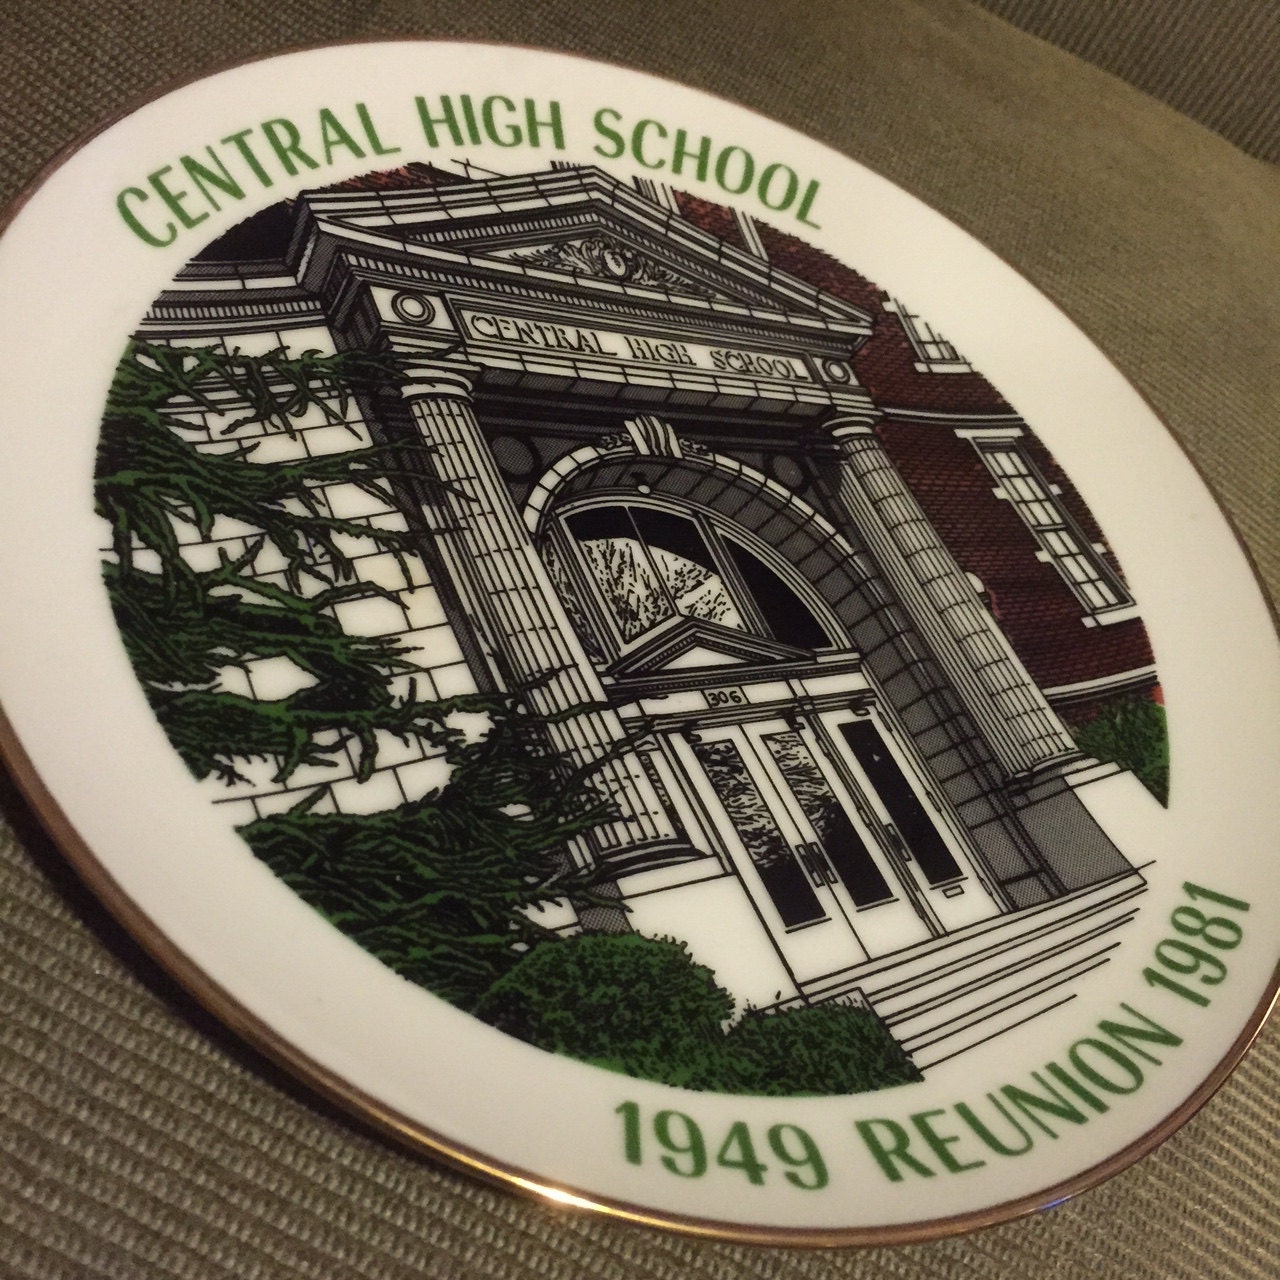 Albums 104+ Images central high school (memphis, tennessee) photos Superb